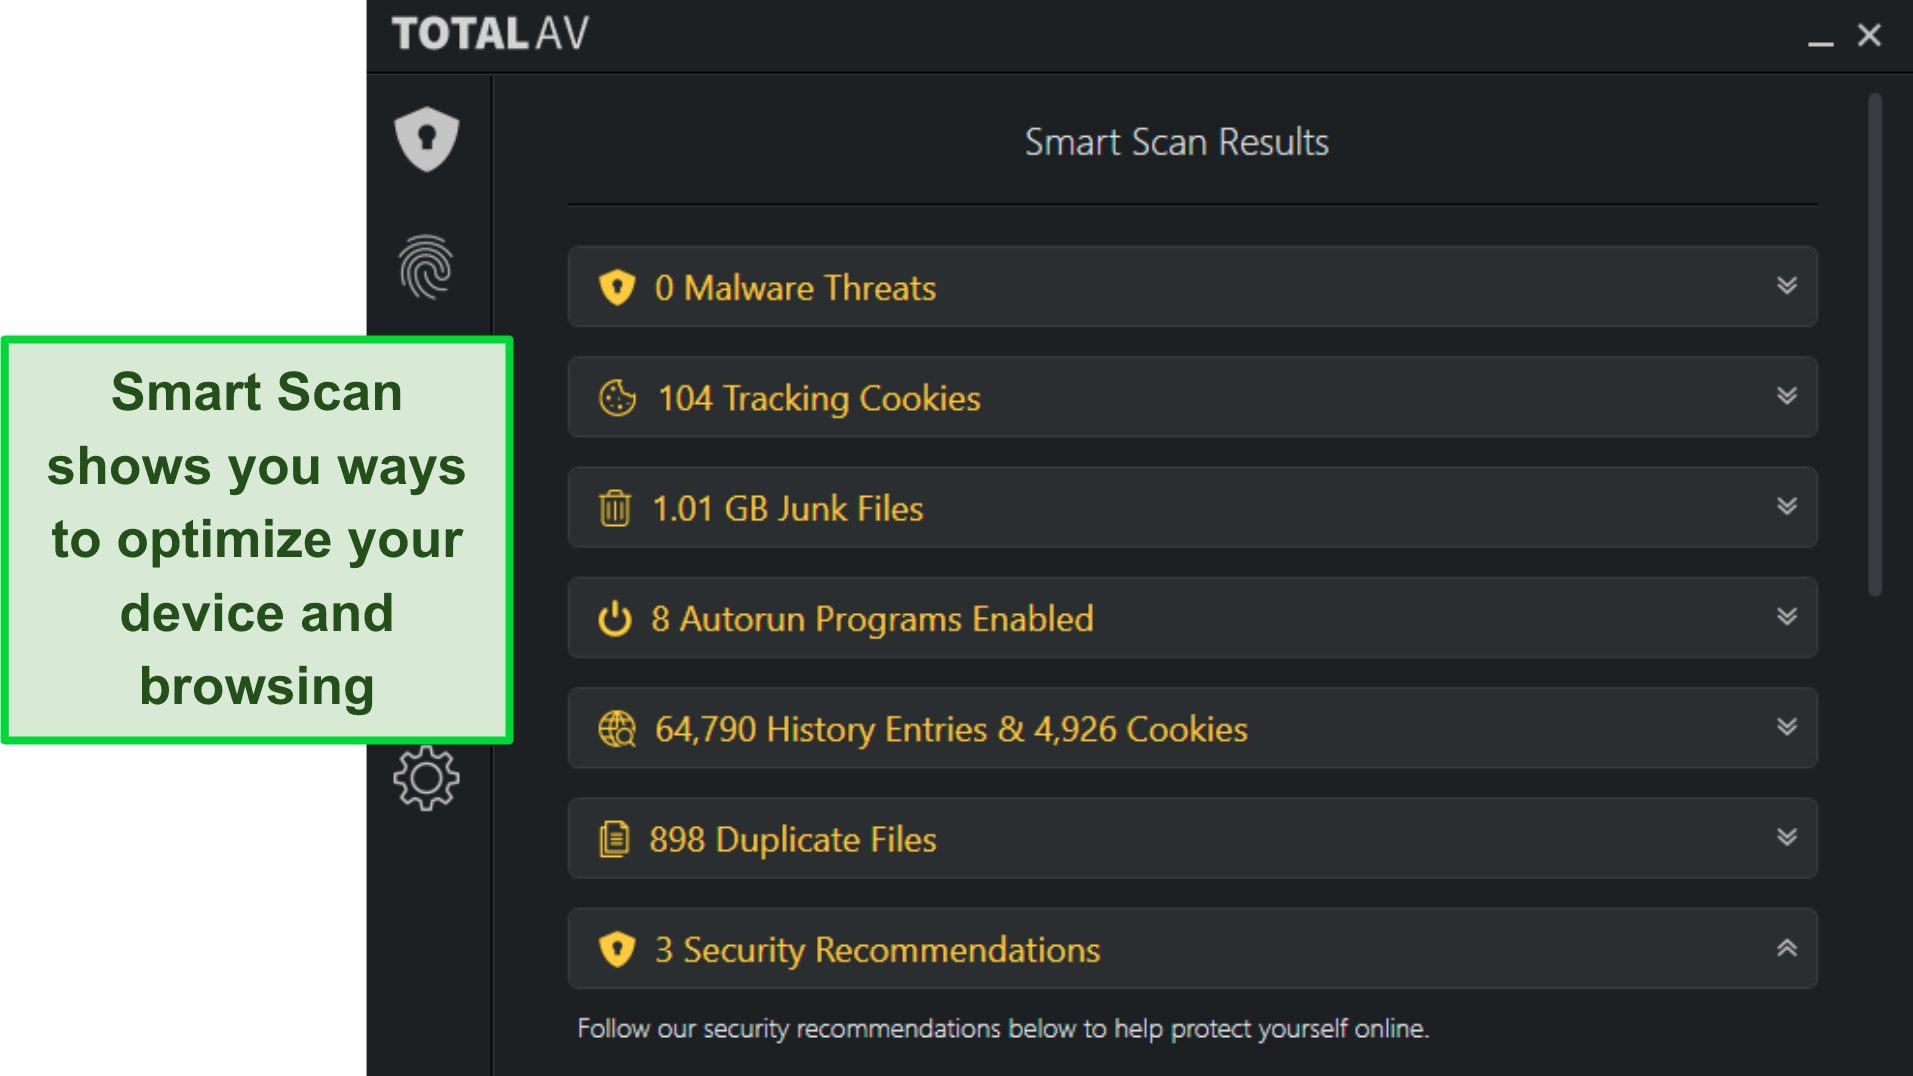 Screenshot of TotalAV's Smart Scan results showing ways the user can optimize their device.